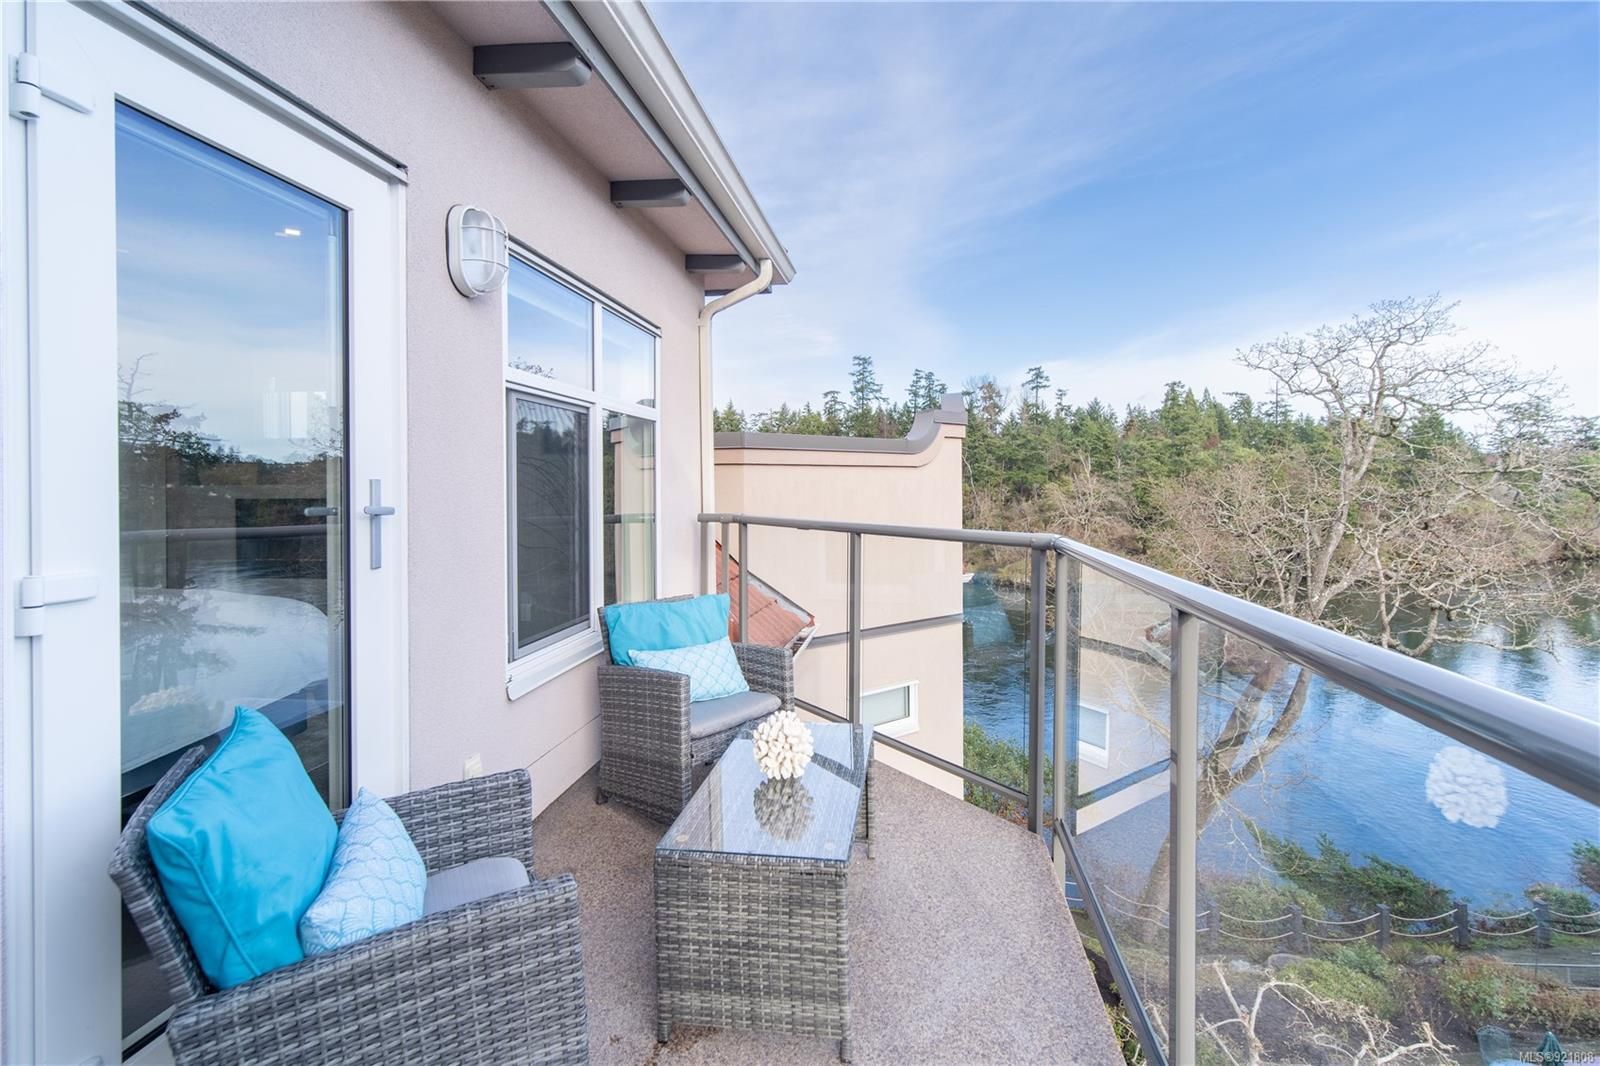 Time to relax on your private balcony overlooking the Gorge waterway